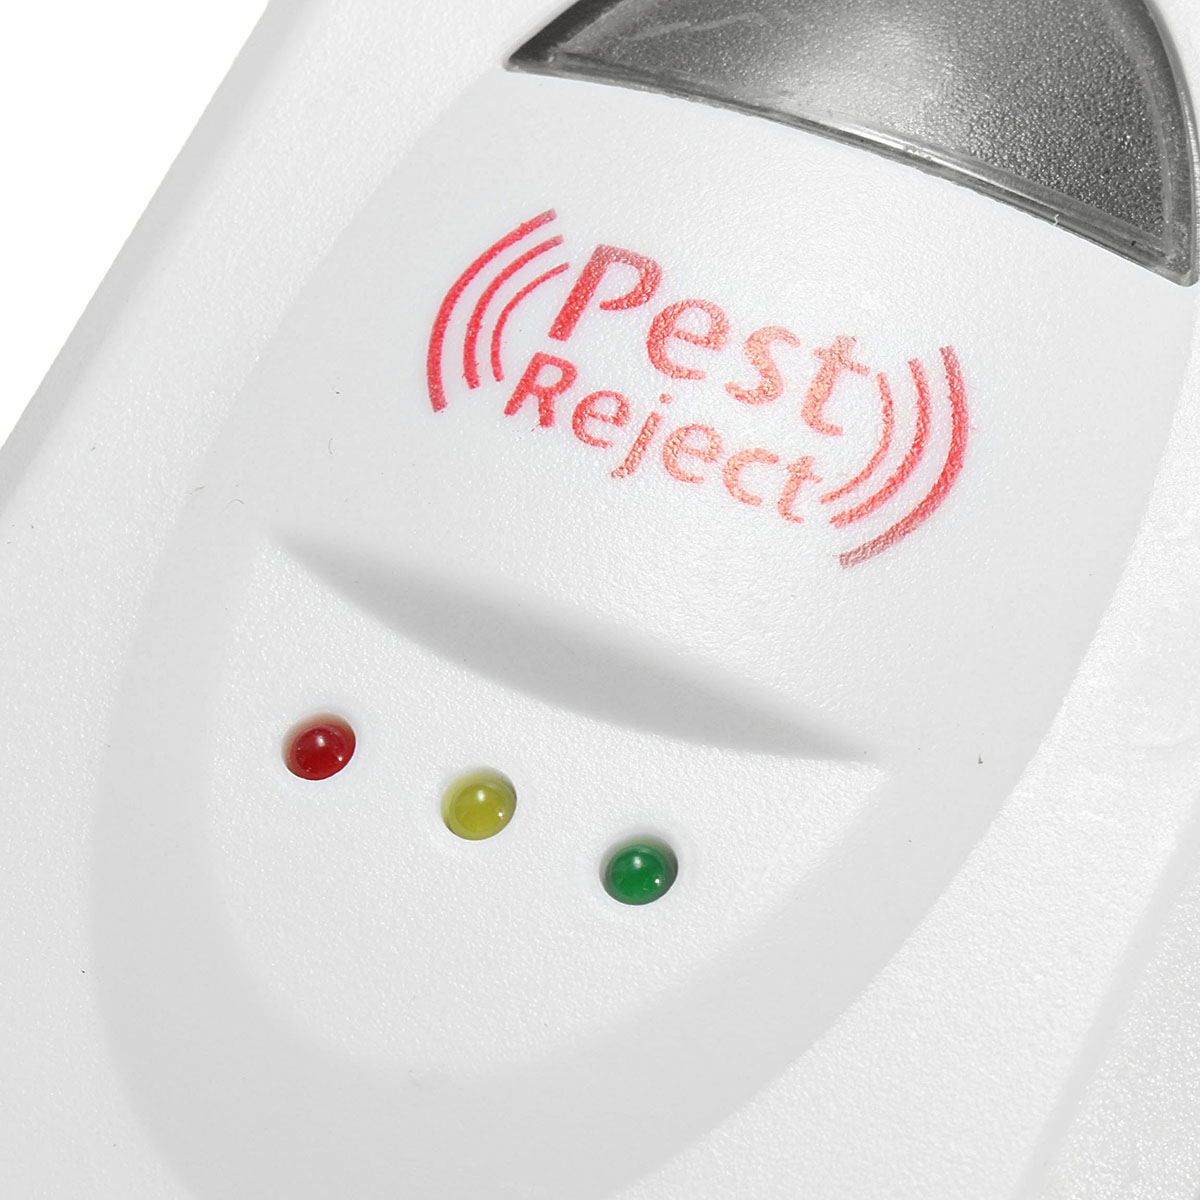 Effective-Safe-Electromagnetic-Electronic-Pest-Repeller-Killer-Insect-Rodent-Mosquitoes-Rat-Cockroac-1397436